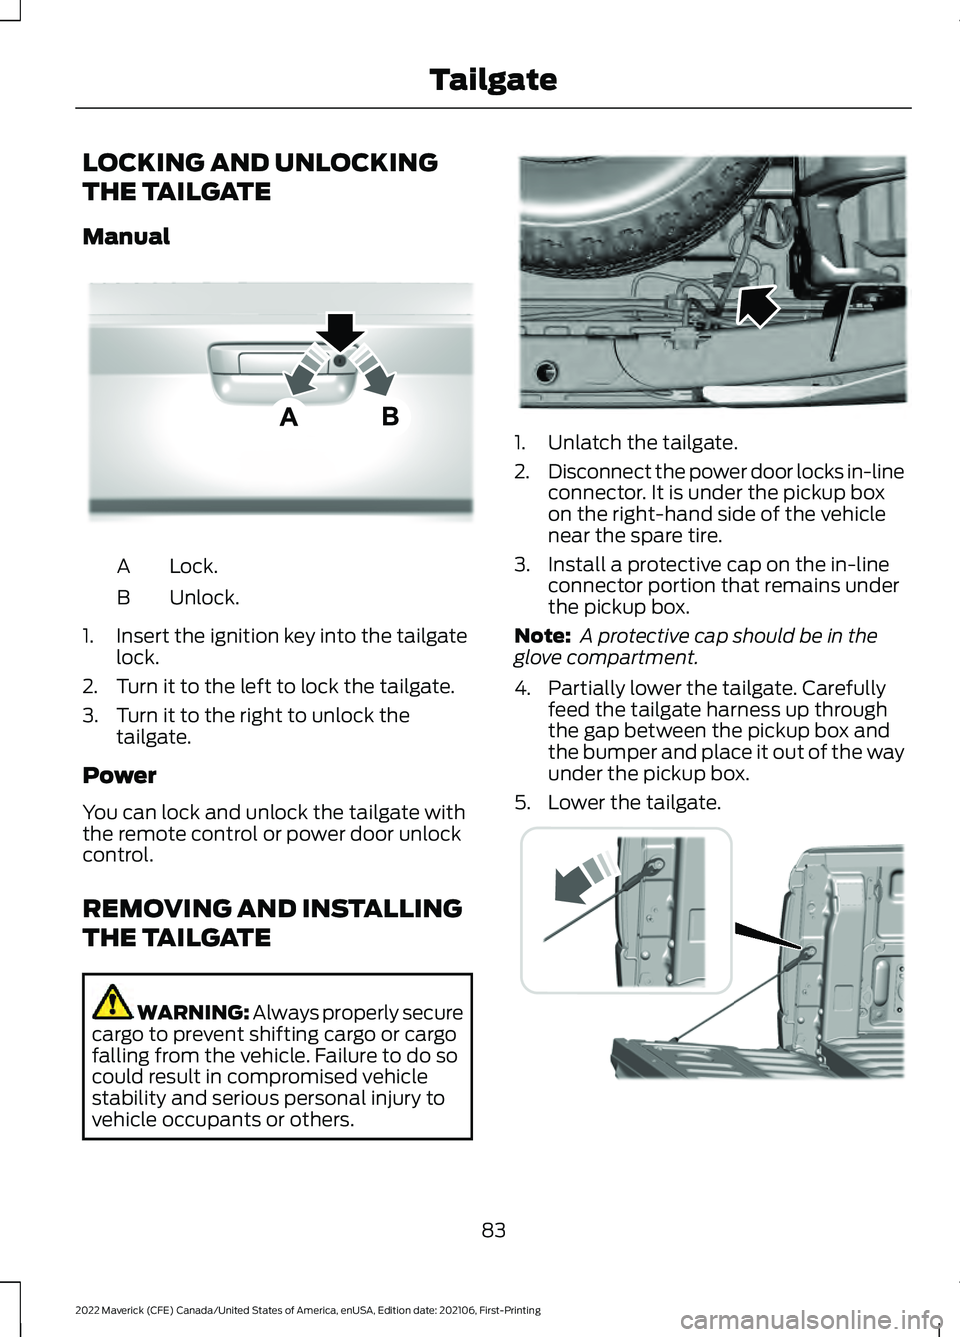 FORD MAVERICK 2022  Owners Manual LOCKING AND UNLOCKING
THE TAILGATE
Manual
Lock.
A
Unlock.
B
1. Insert the ignition key into the tailgate lock.
2. Turn it to the left to lock the tailgate.
3. Turn it to the right to unlock the tailga